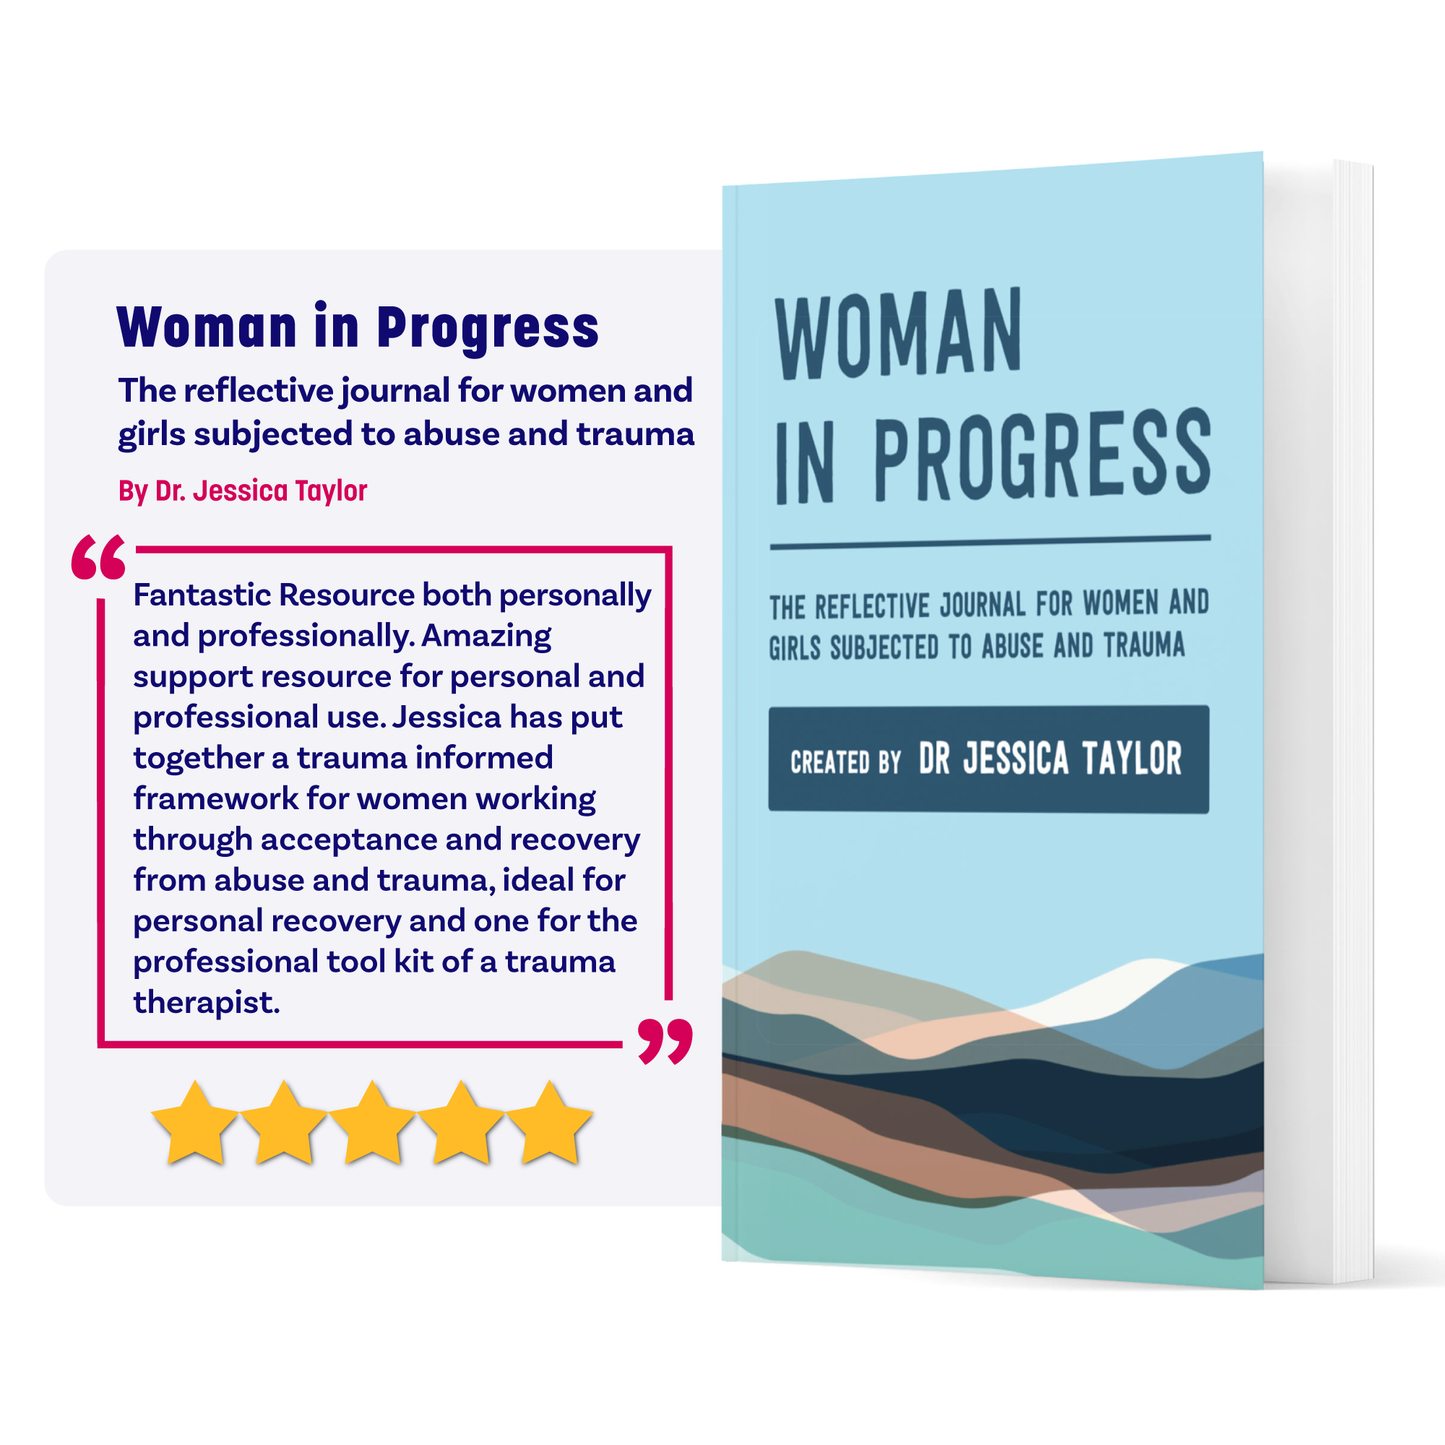 Woman in Progress: The Reflective Journal for Women and Girls Subjected to Abuse and Trauma